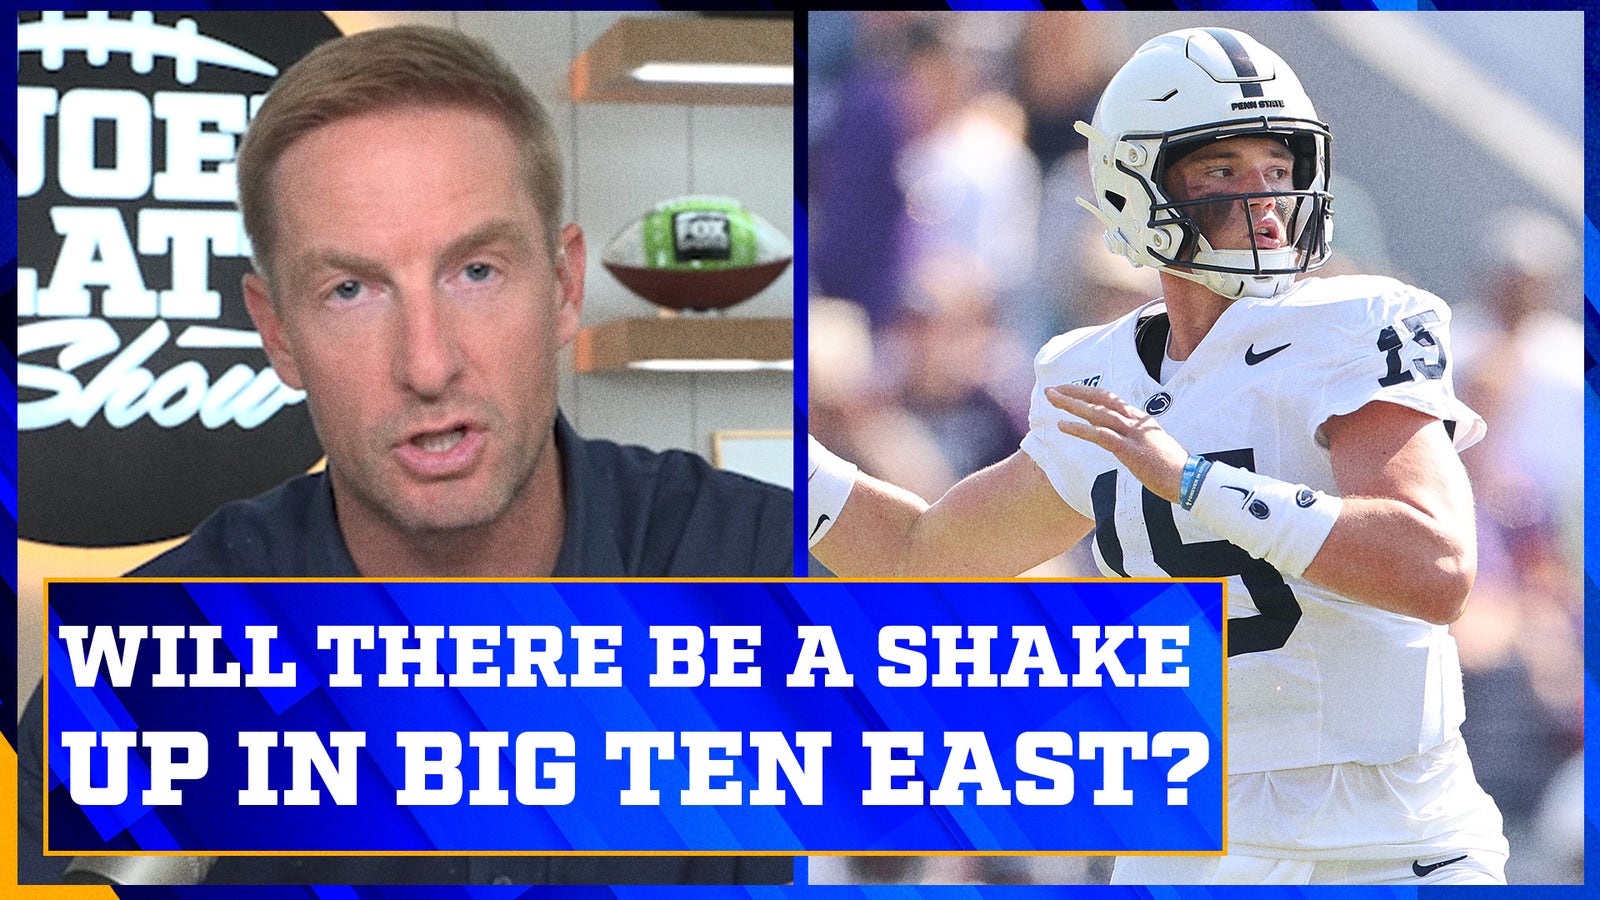 What is the bigger picture for Penn State, Ohio State?